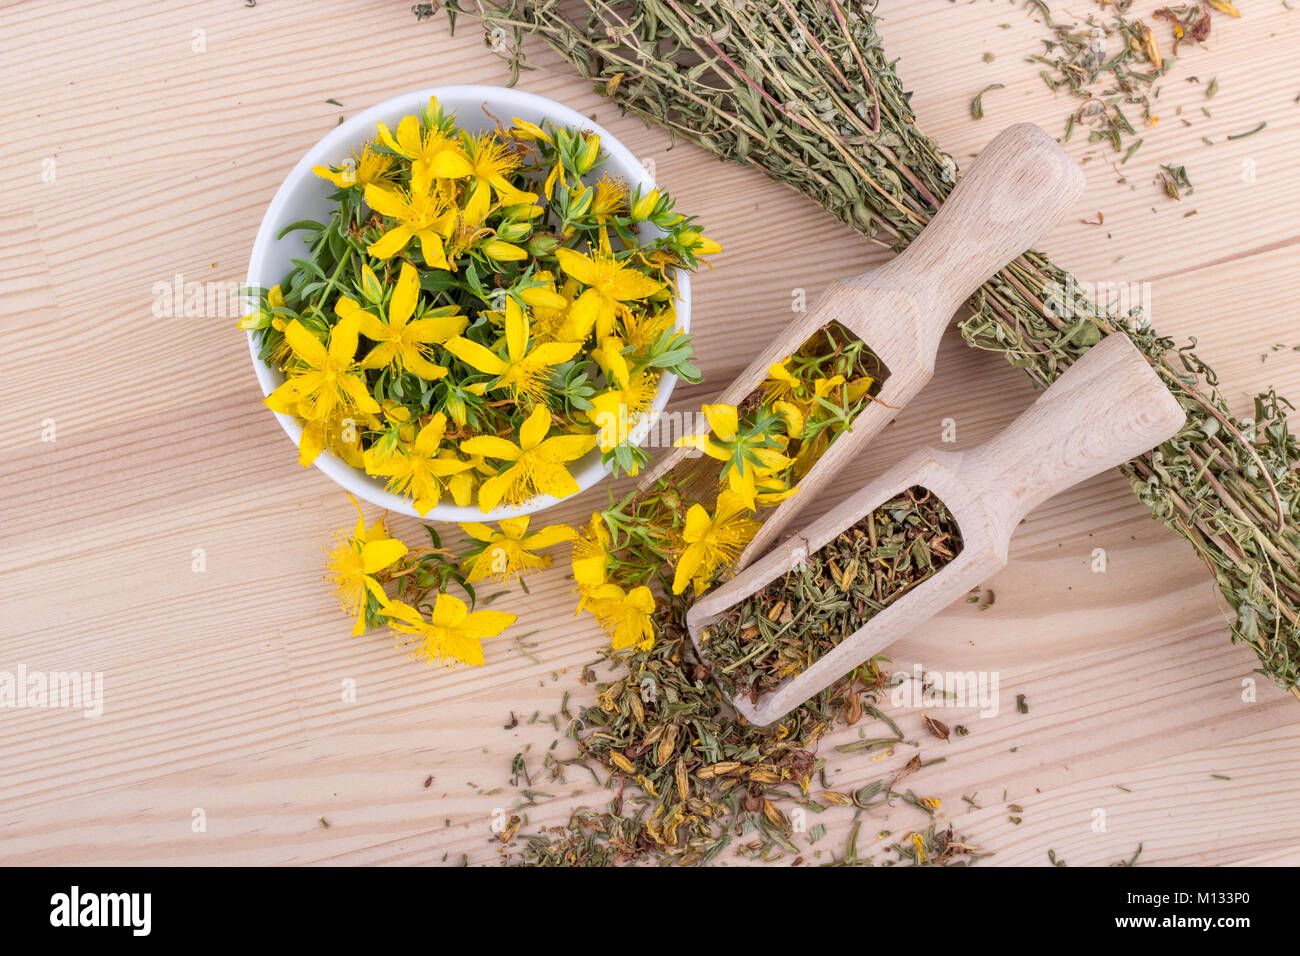 top view on dried and fresh, flowering St. John's wort on a wooden background Stock Photo